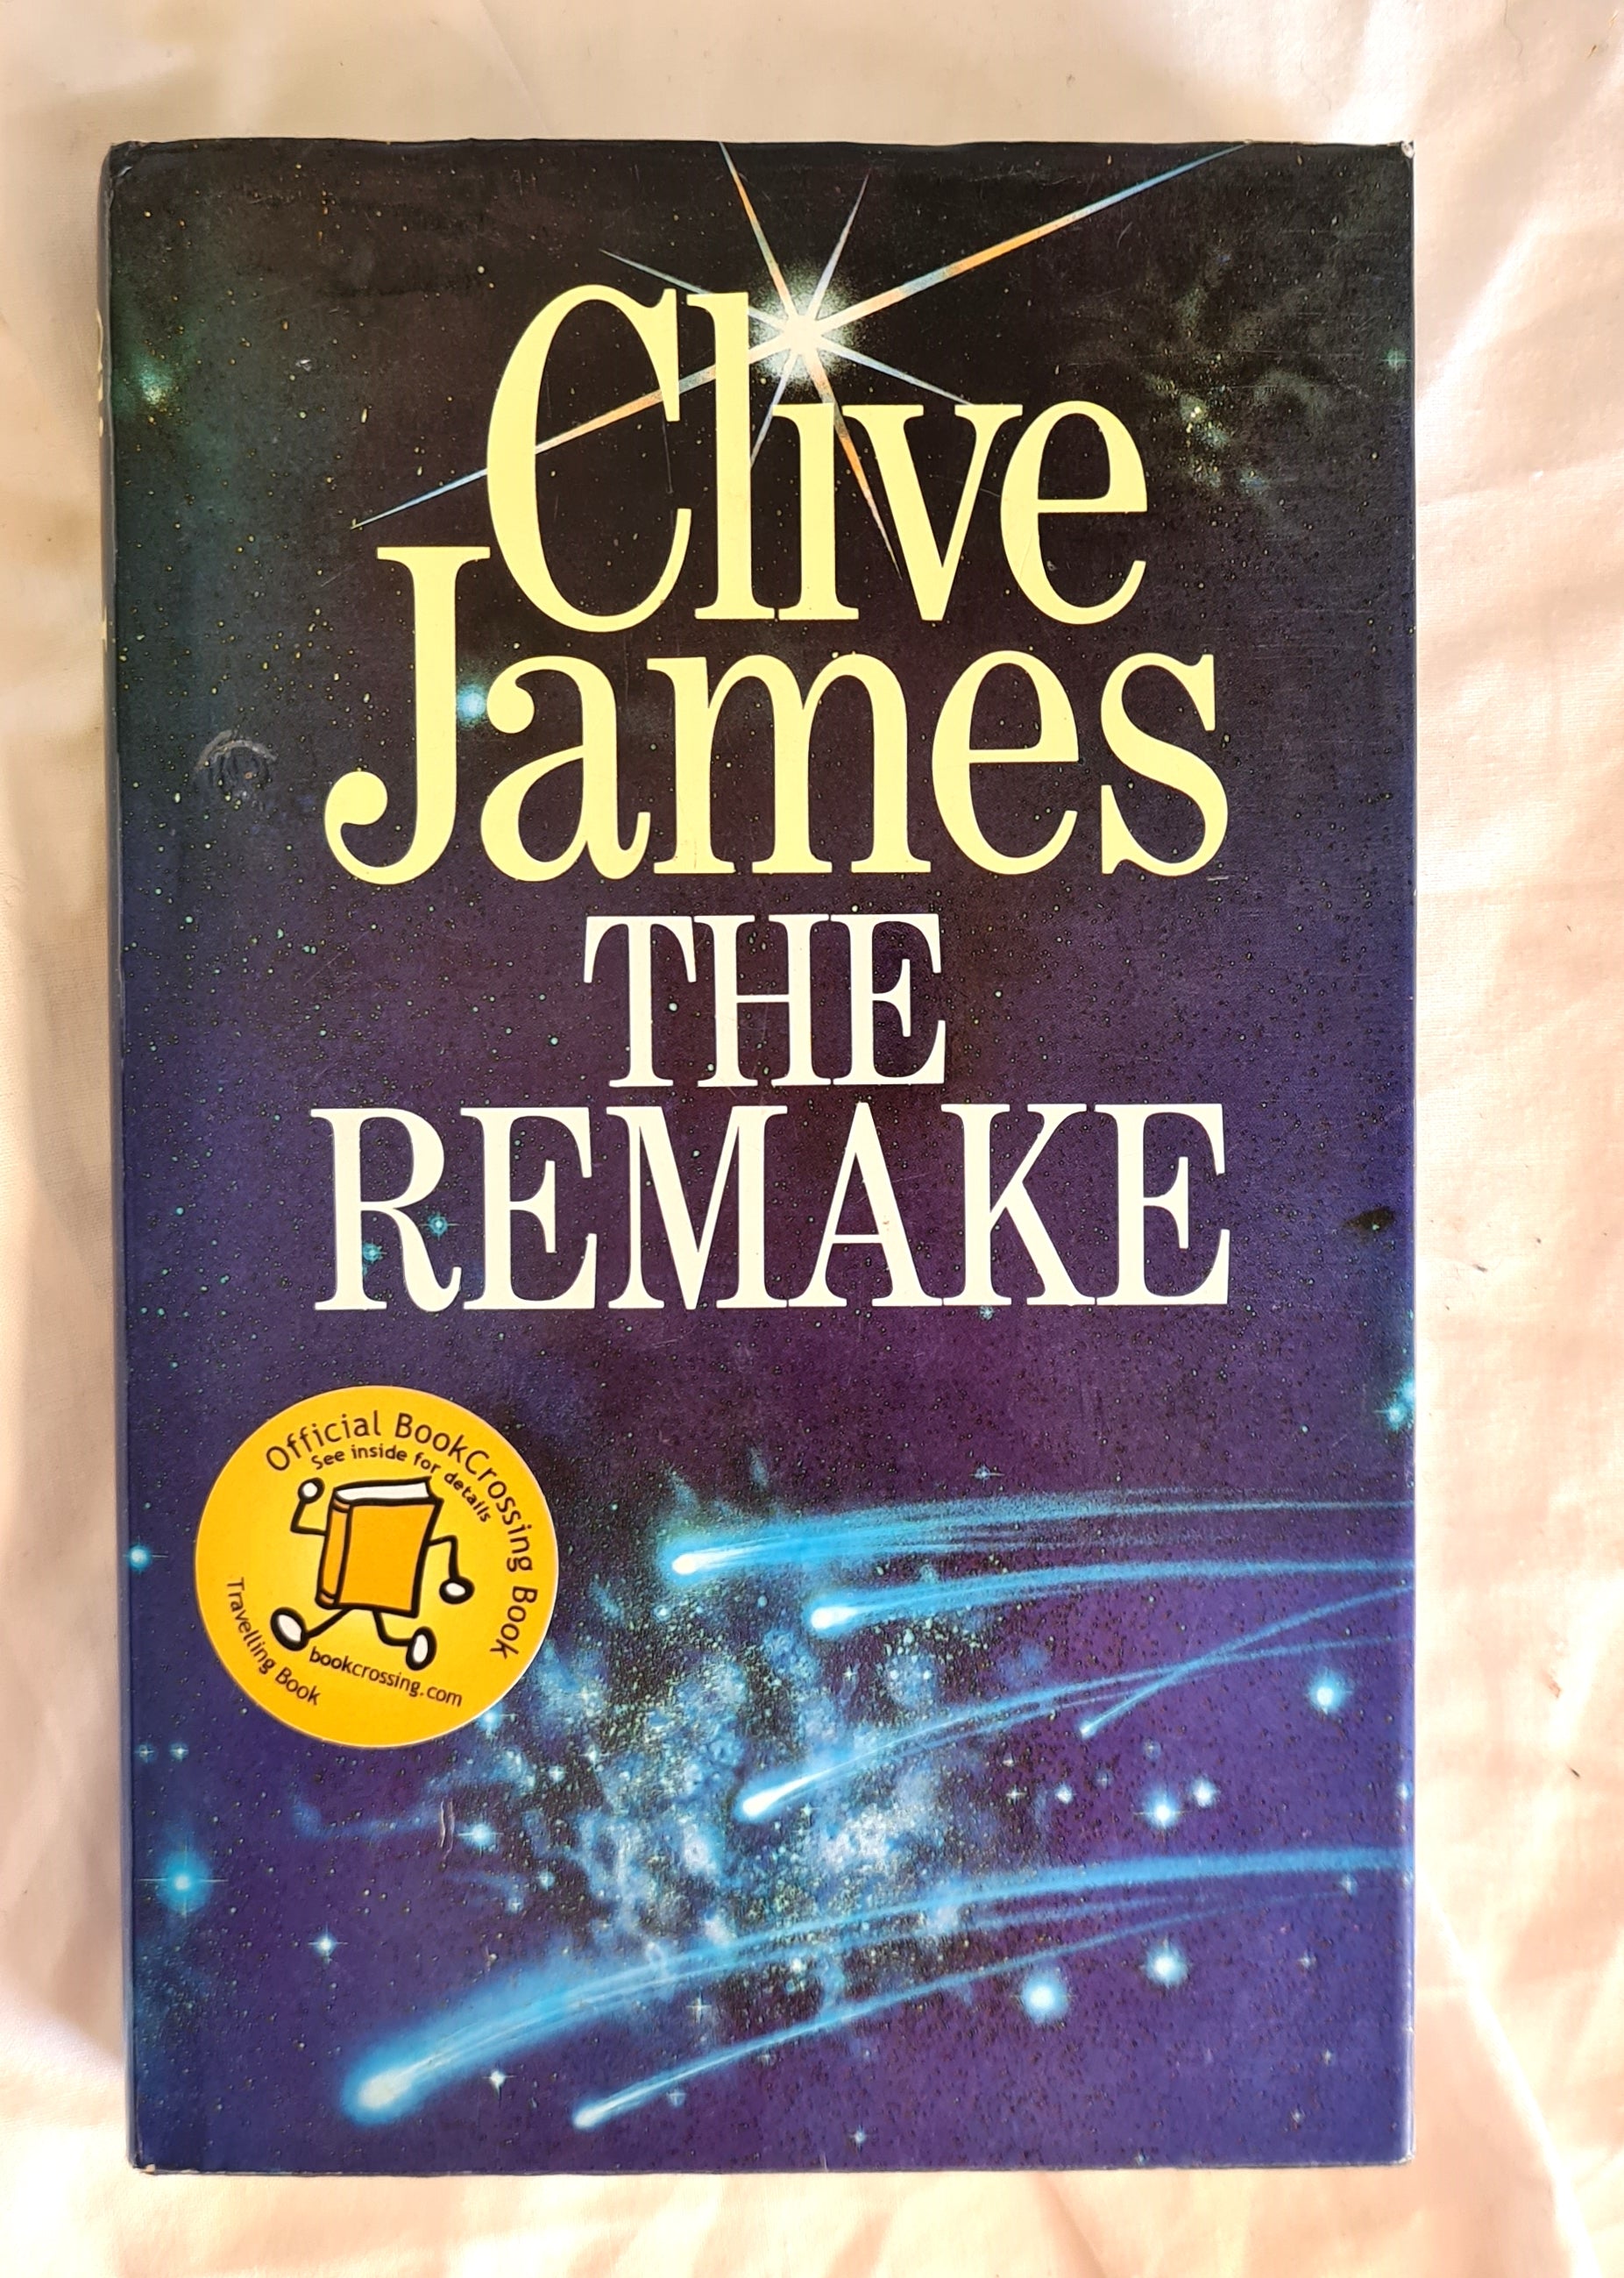 The Remake by Clive James